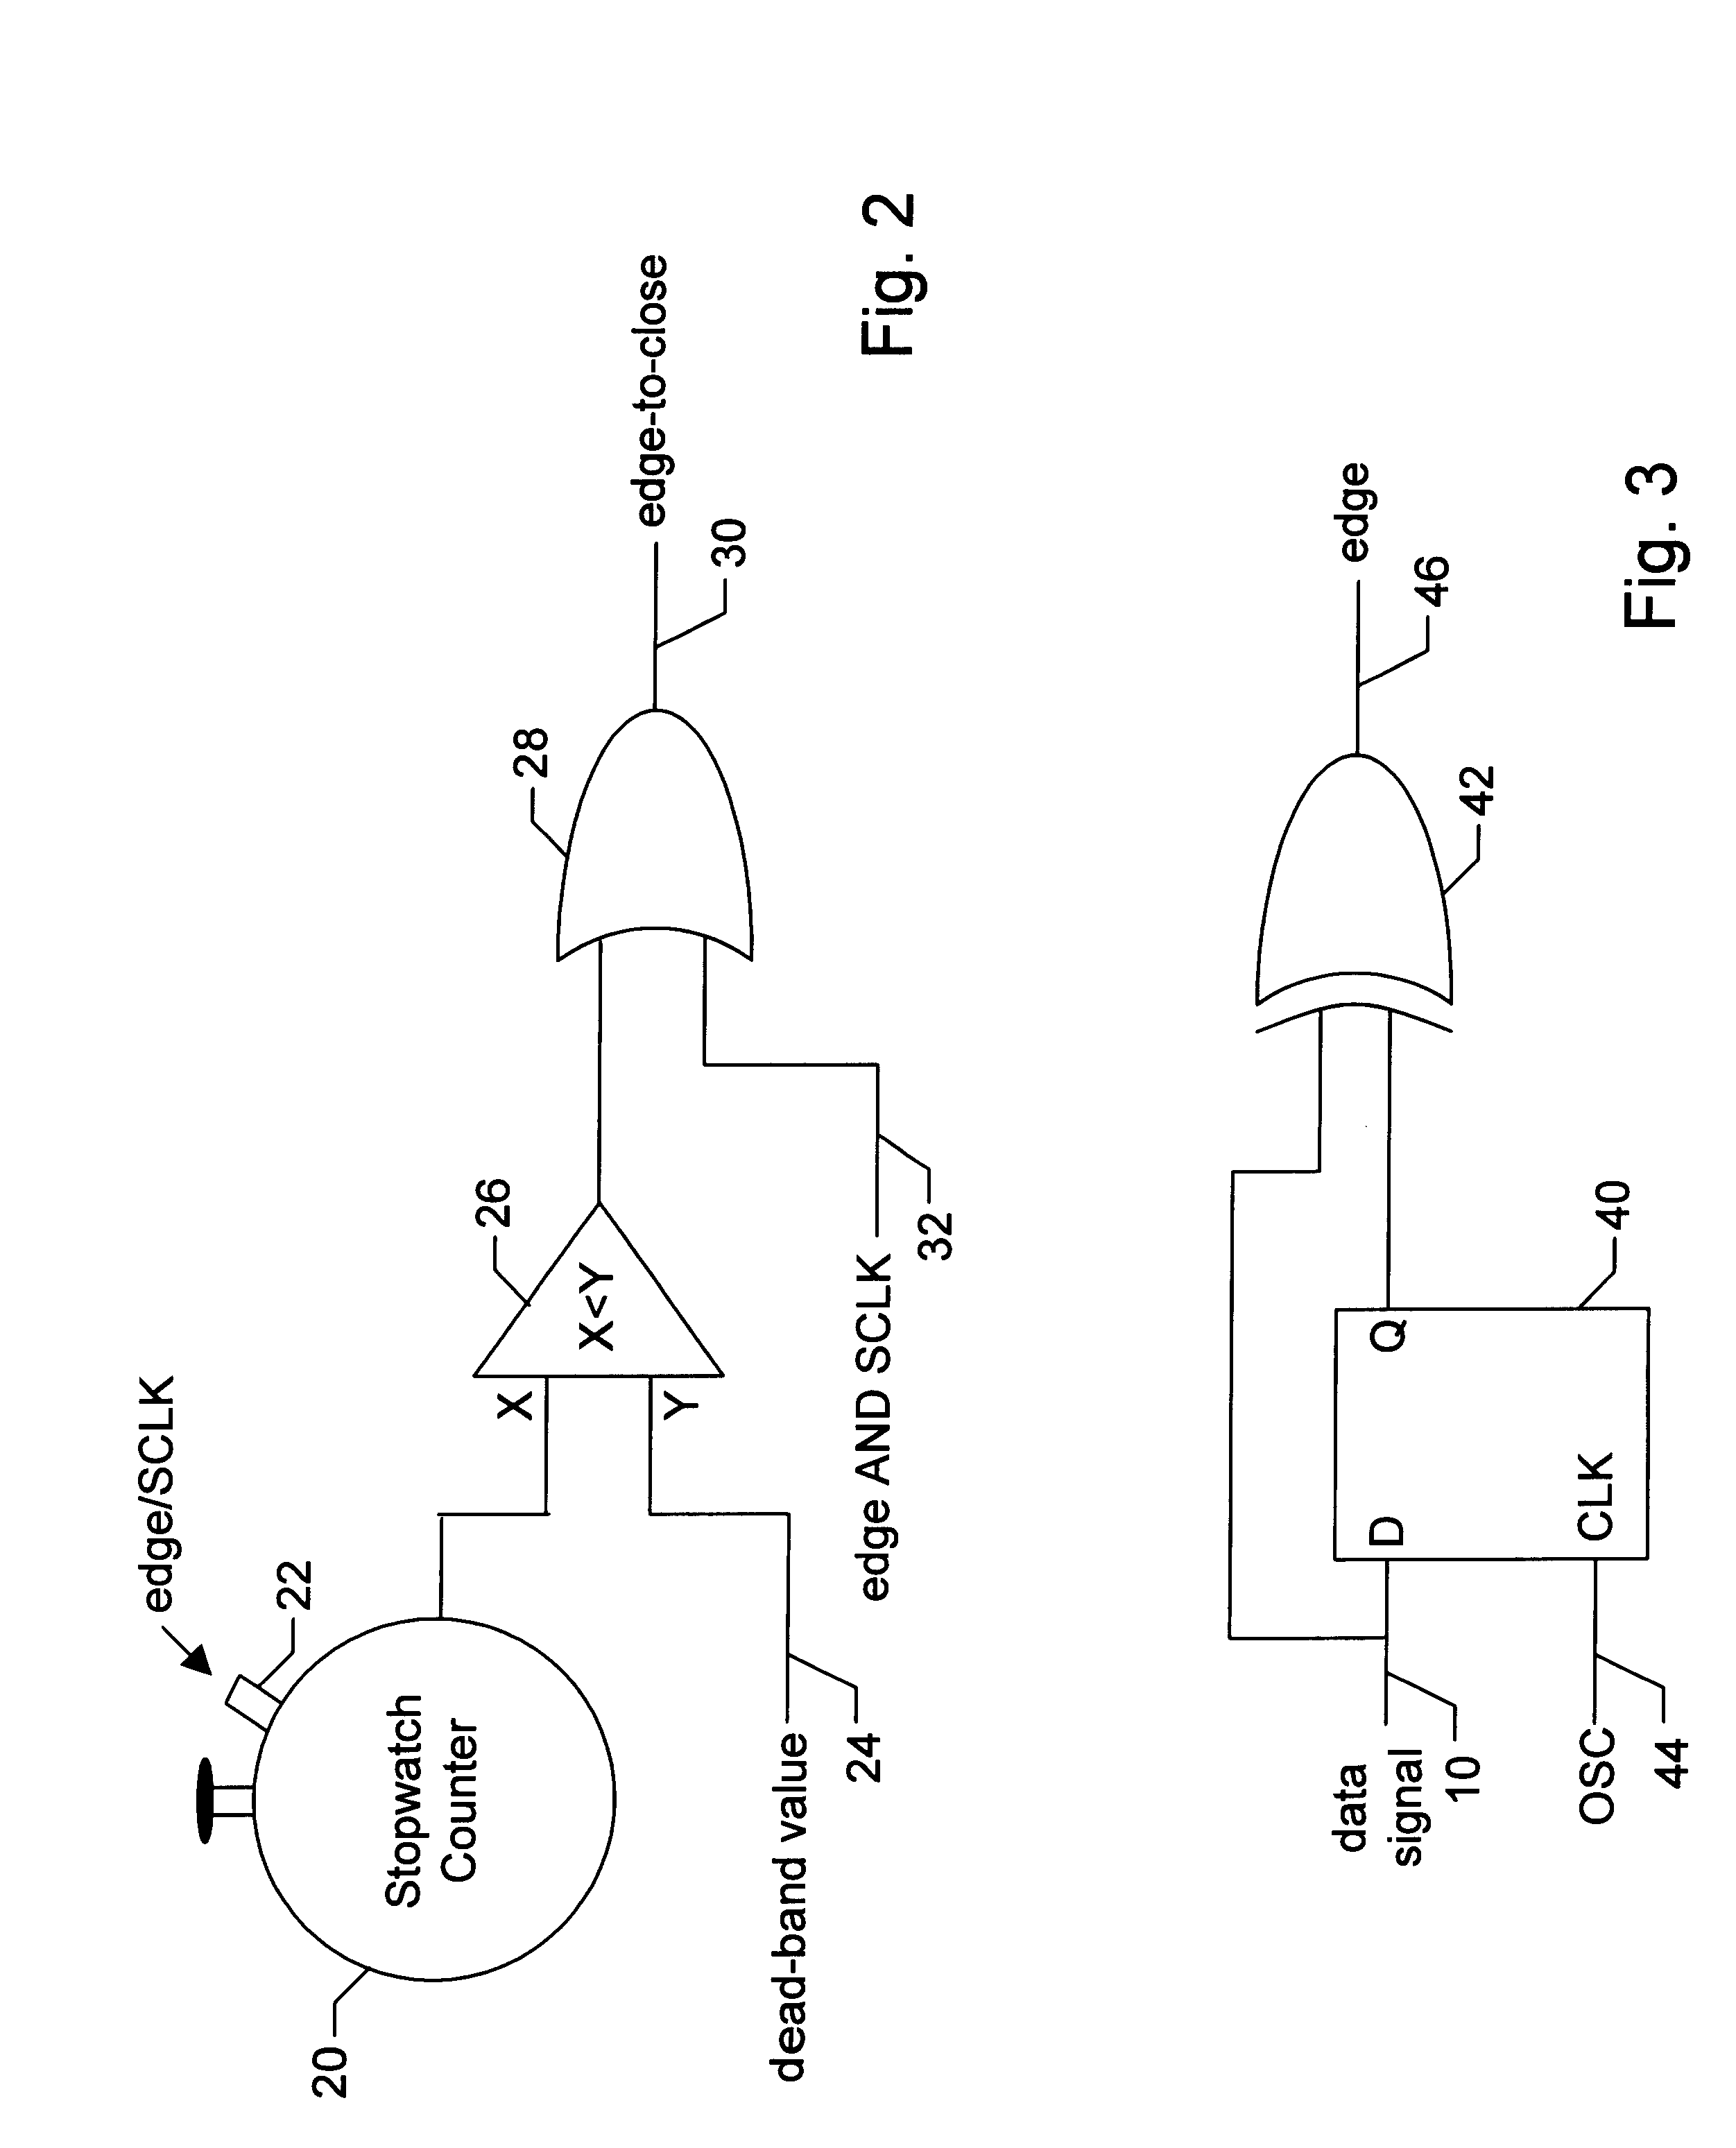 Adjustable serial-to-parallel or parallel-to-serial converter